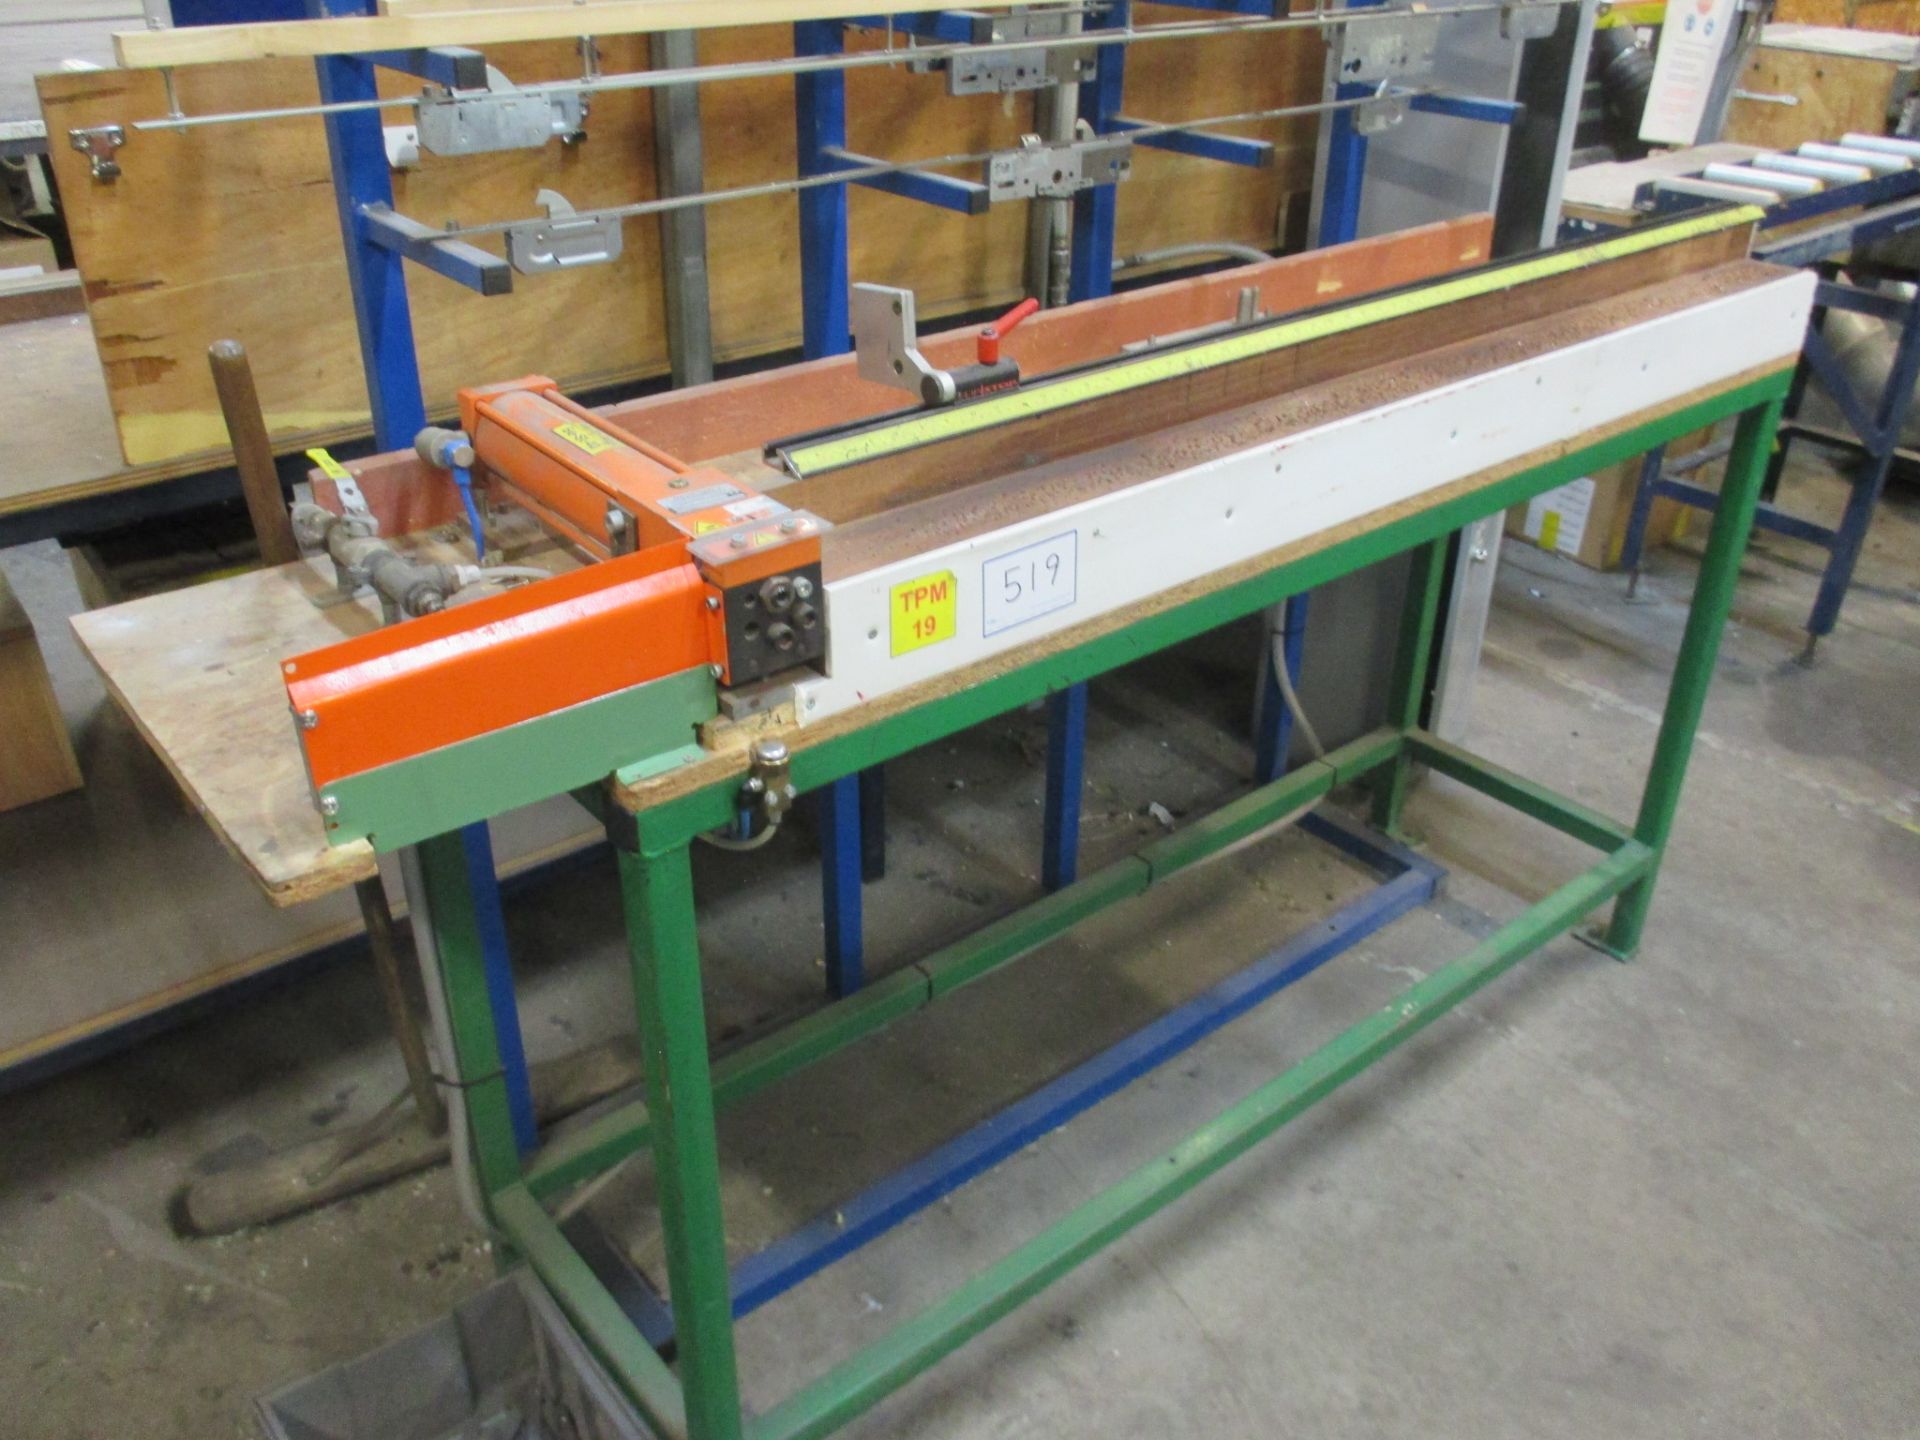 1: Reiplinger, MultiMax Be-St-40, Punching Press and Stand, Serial Number: 051111, Year of Manufactu